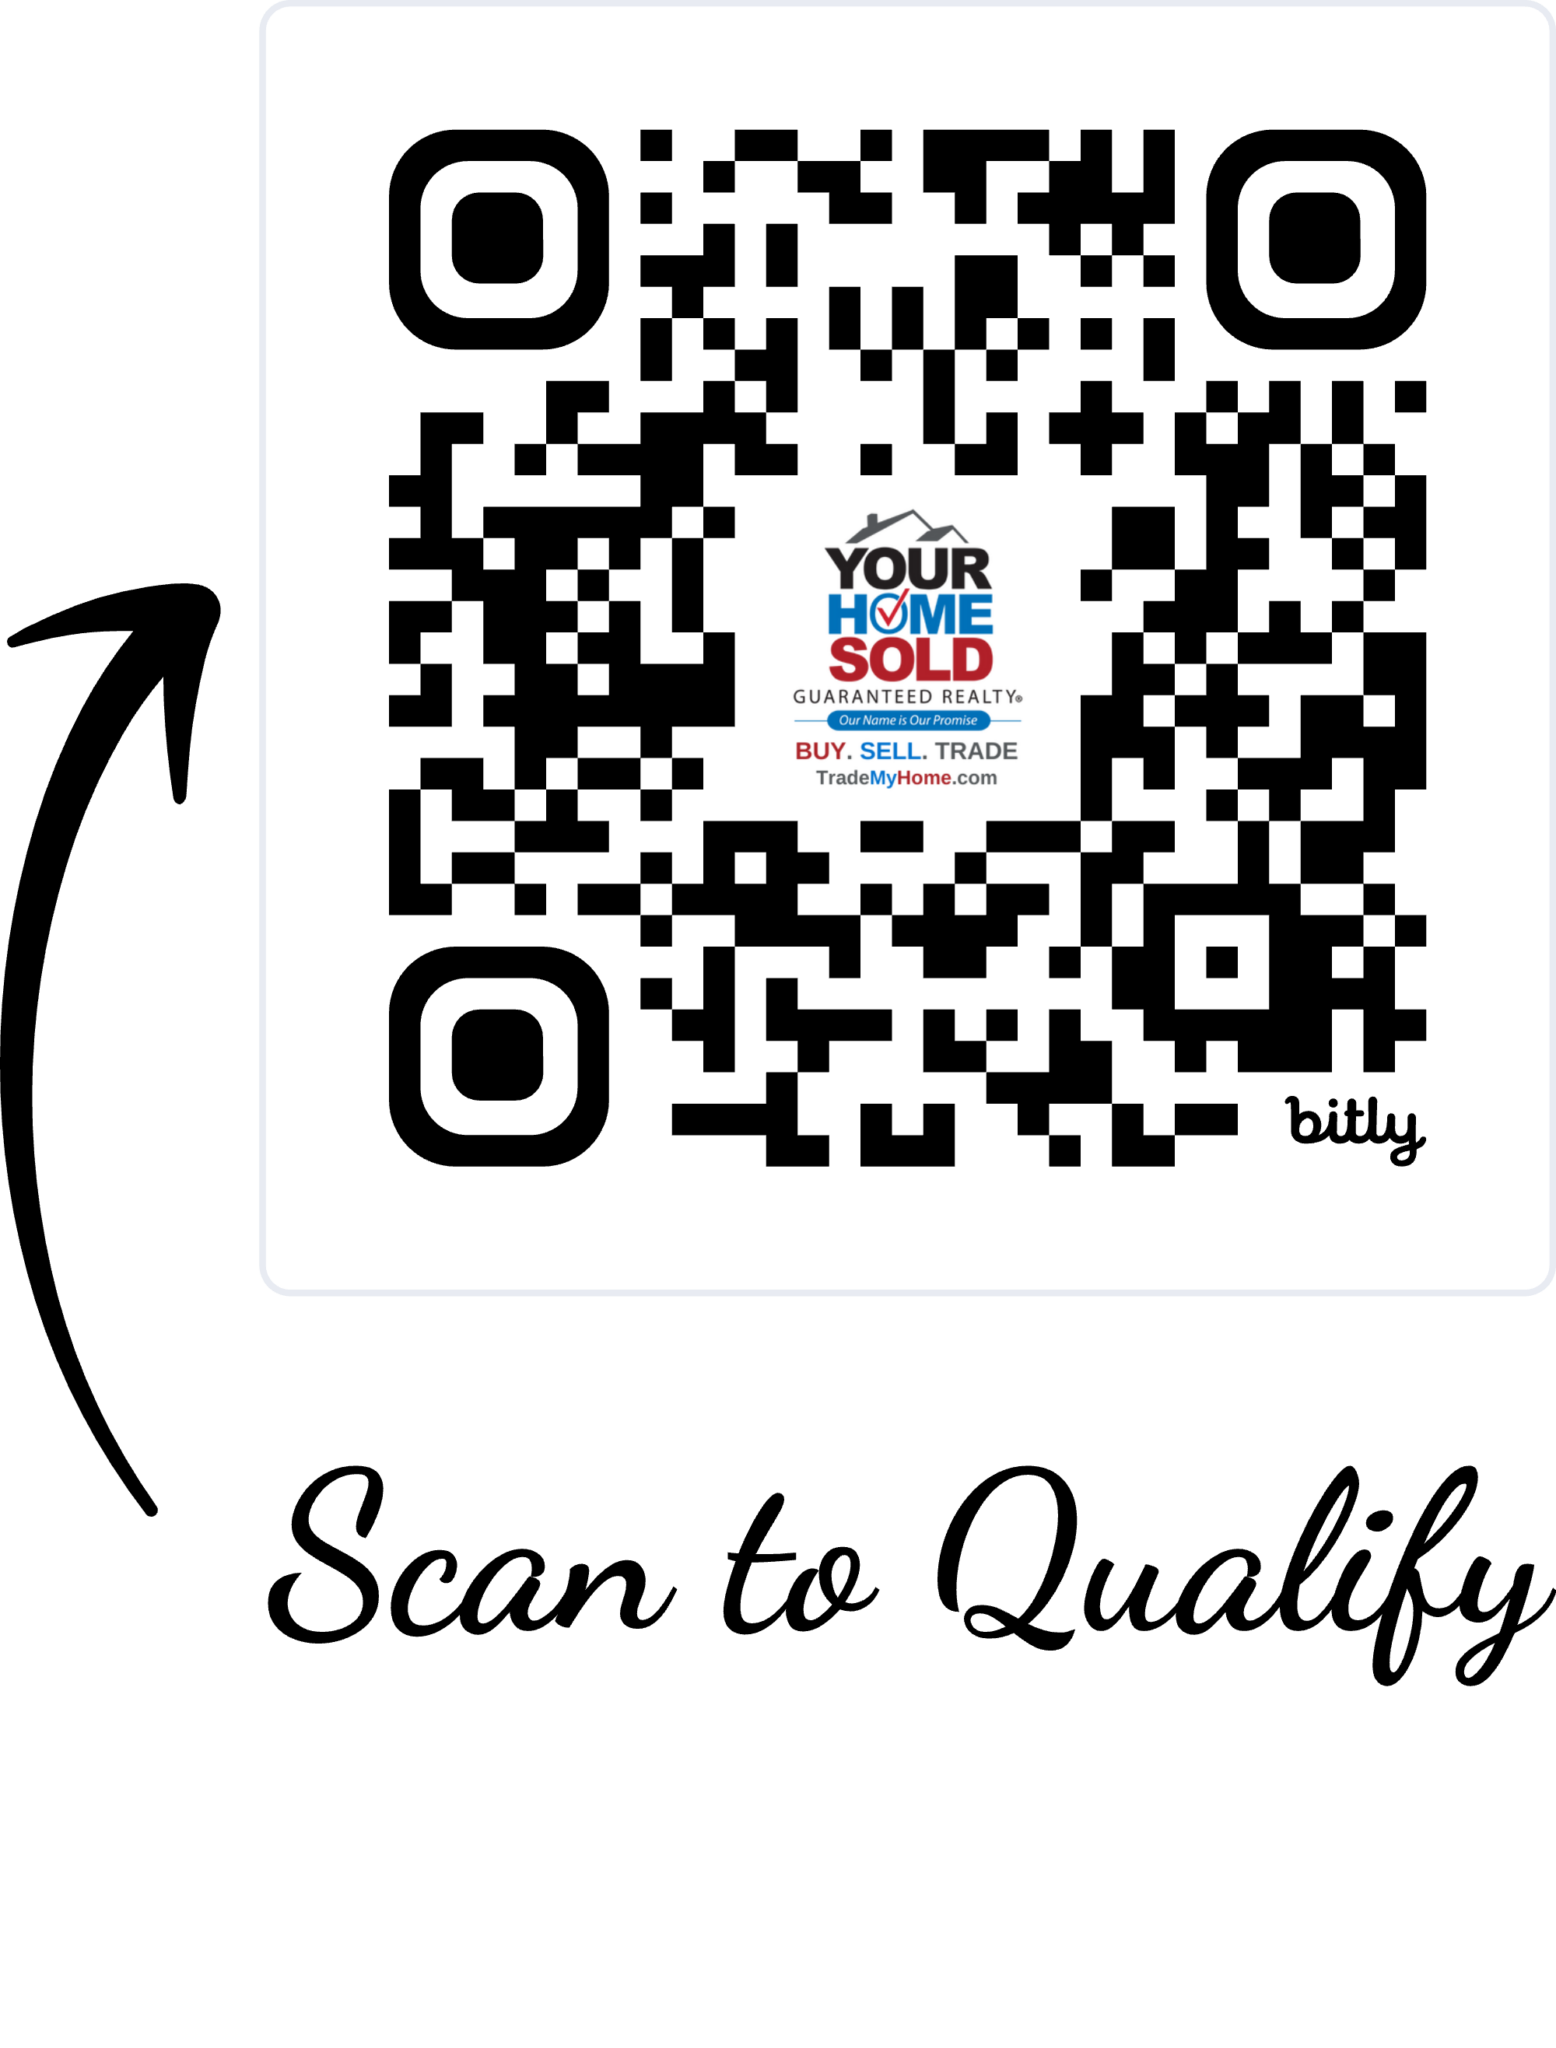 Scan QR Code to Qualify for Loan